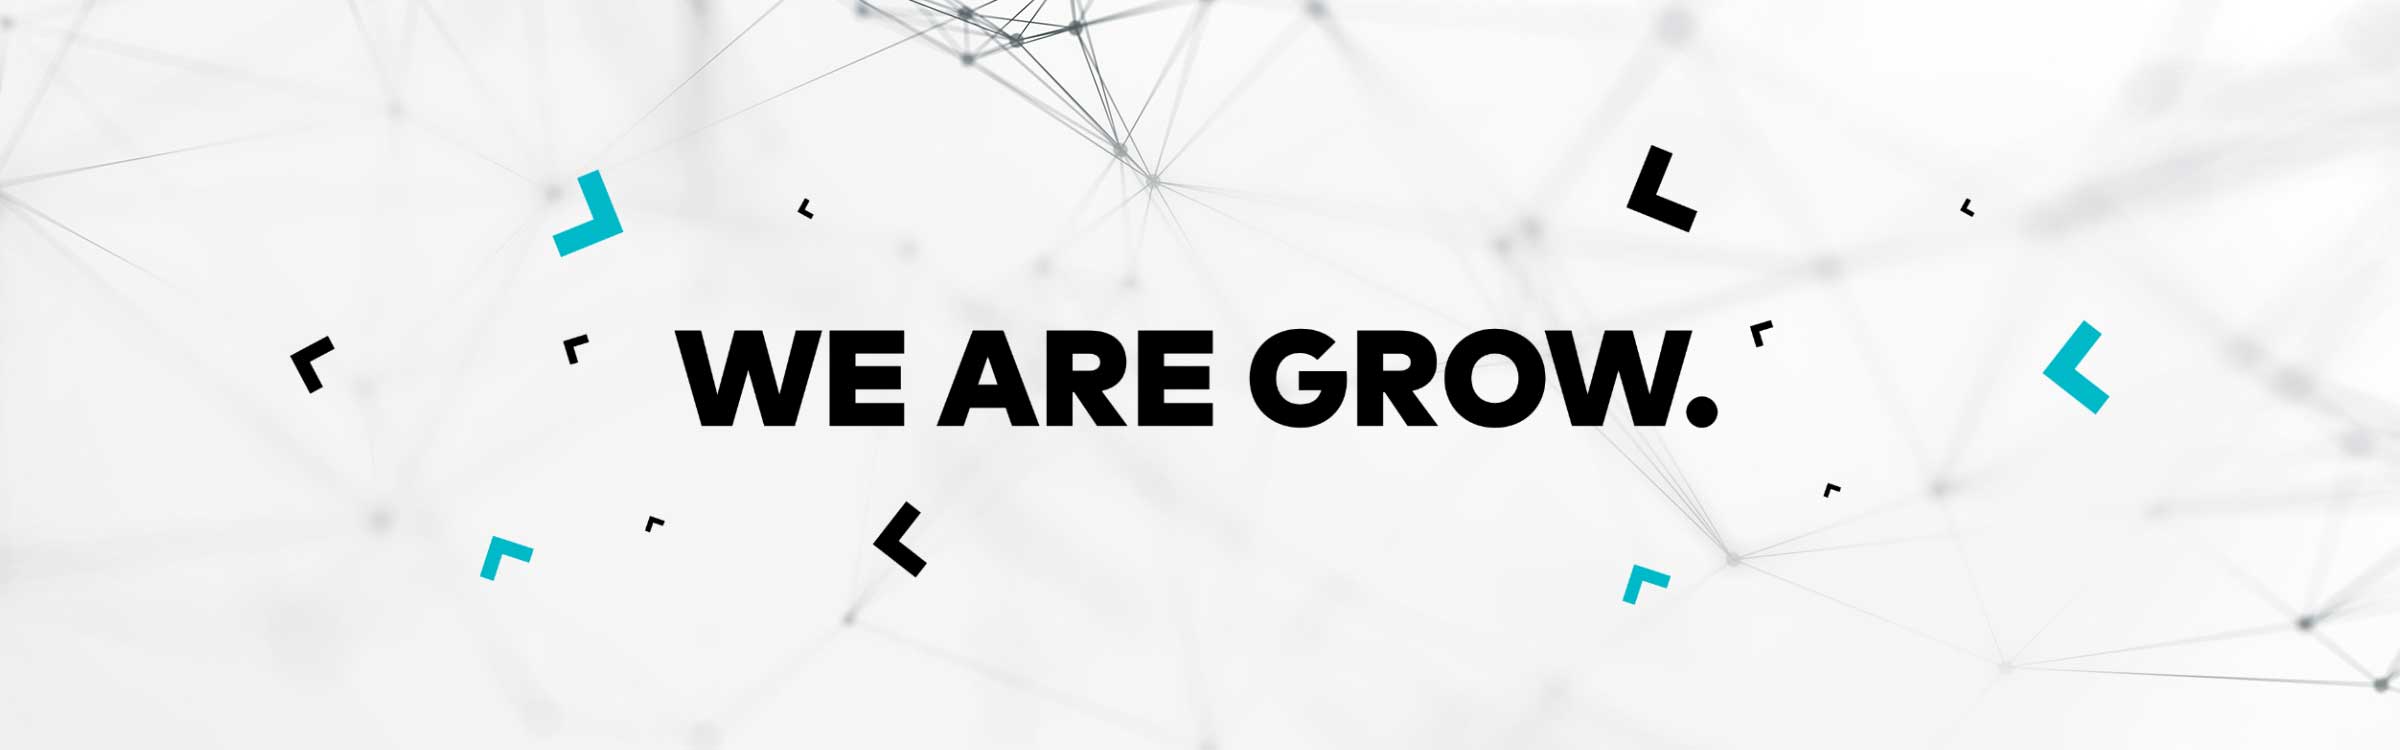 We are GROW